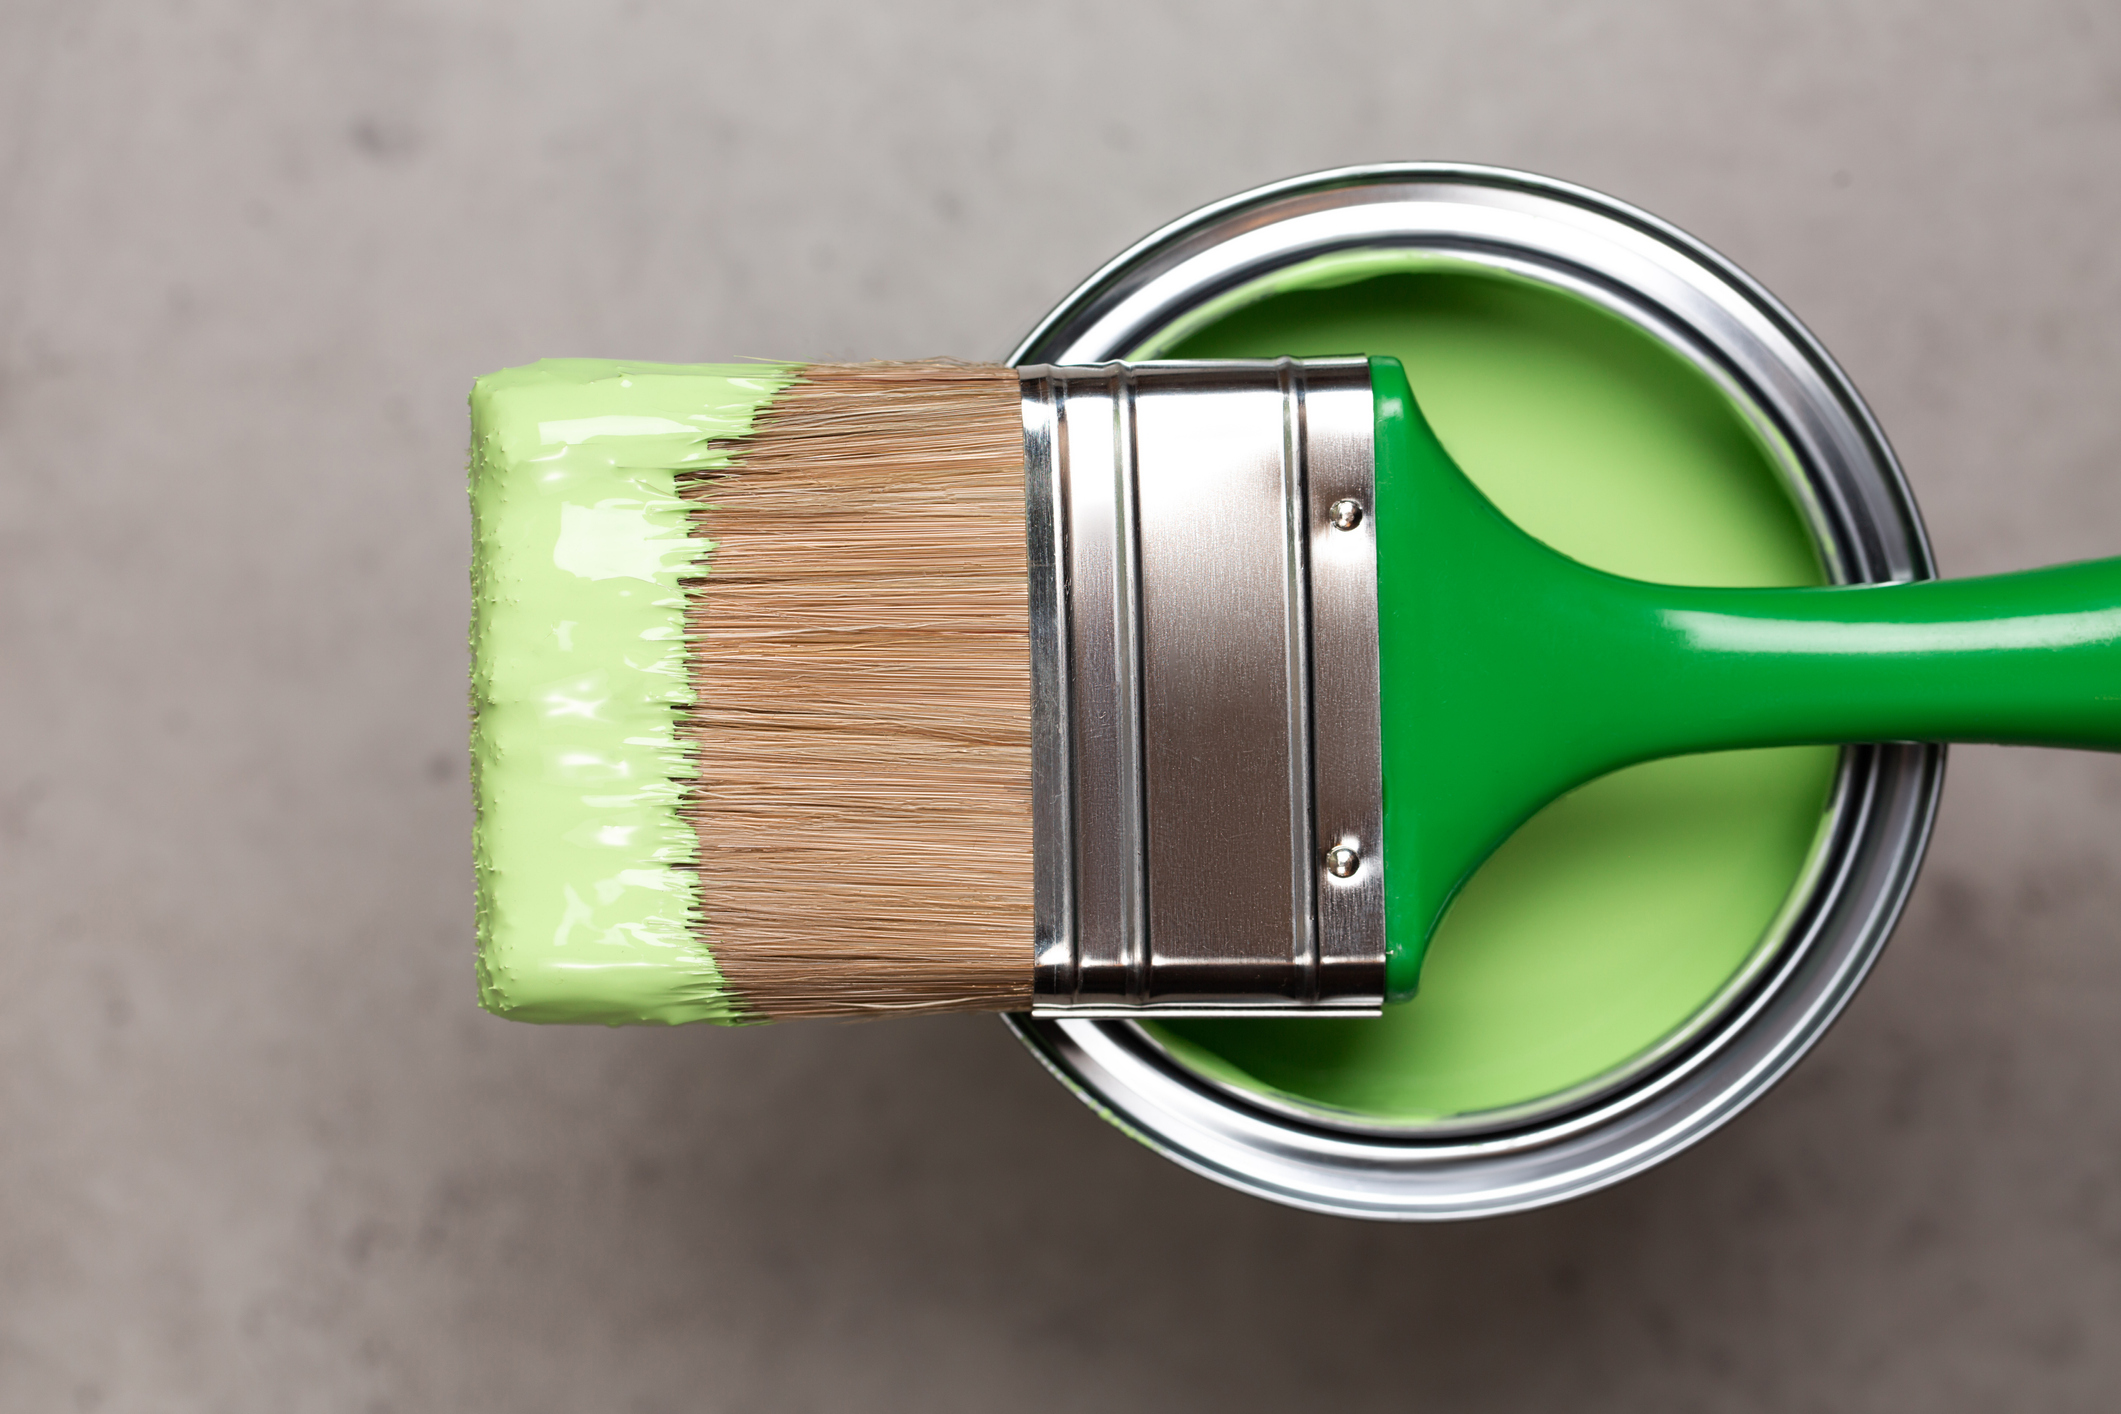 The Benefits of Environmentally Friendly Wood Paint